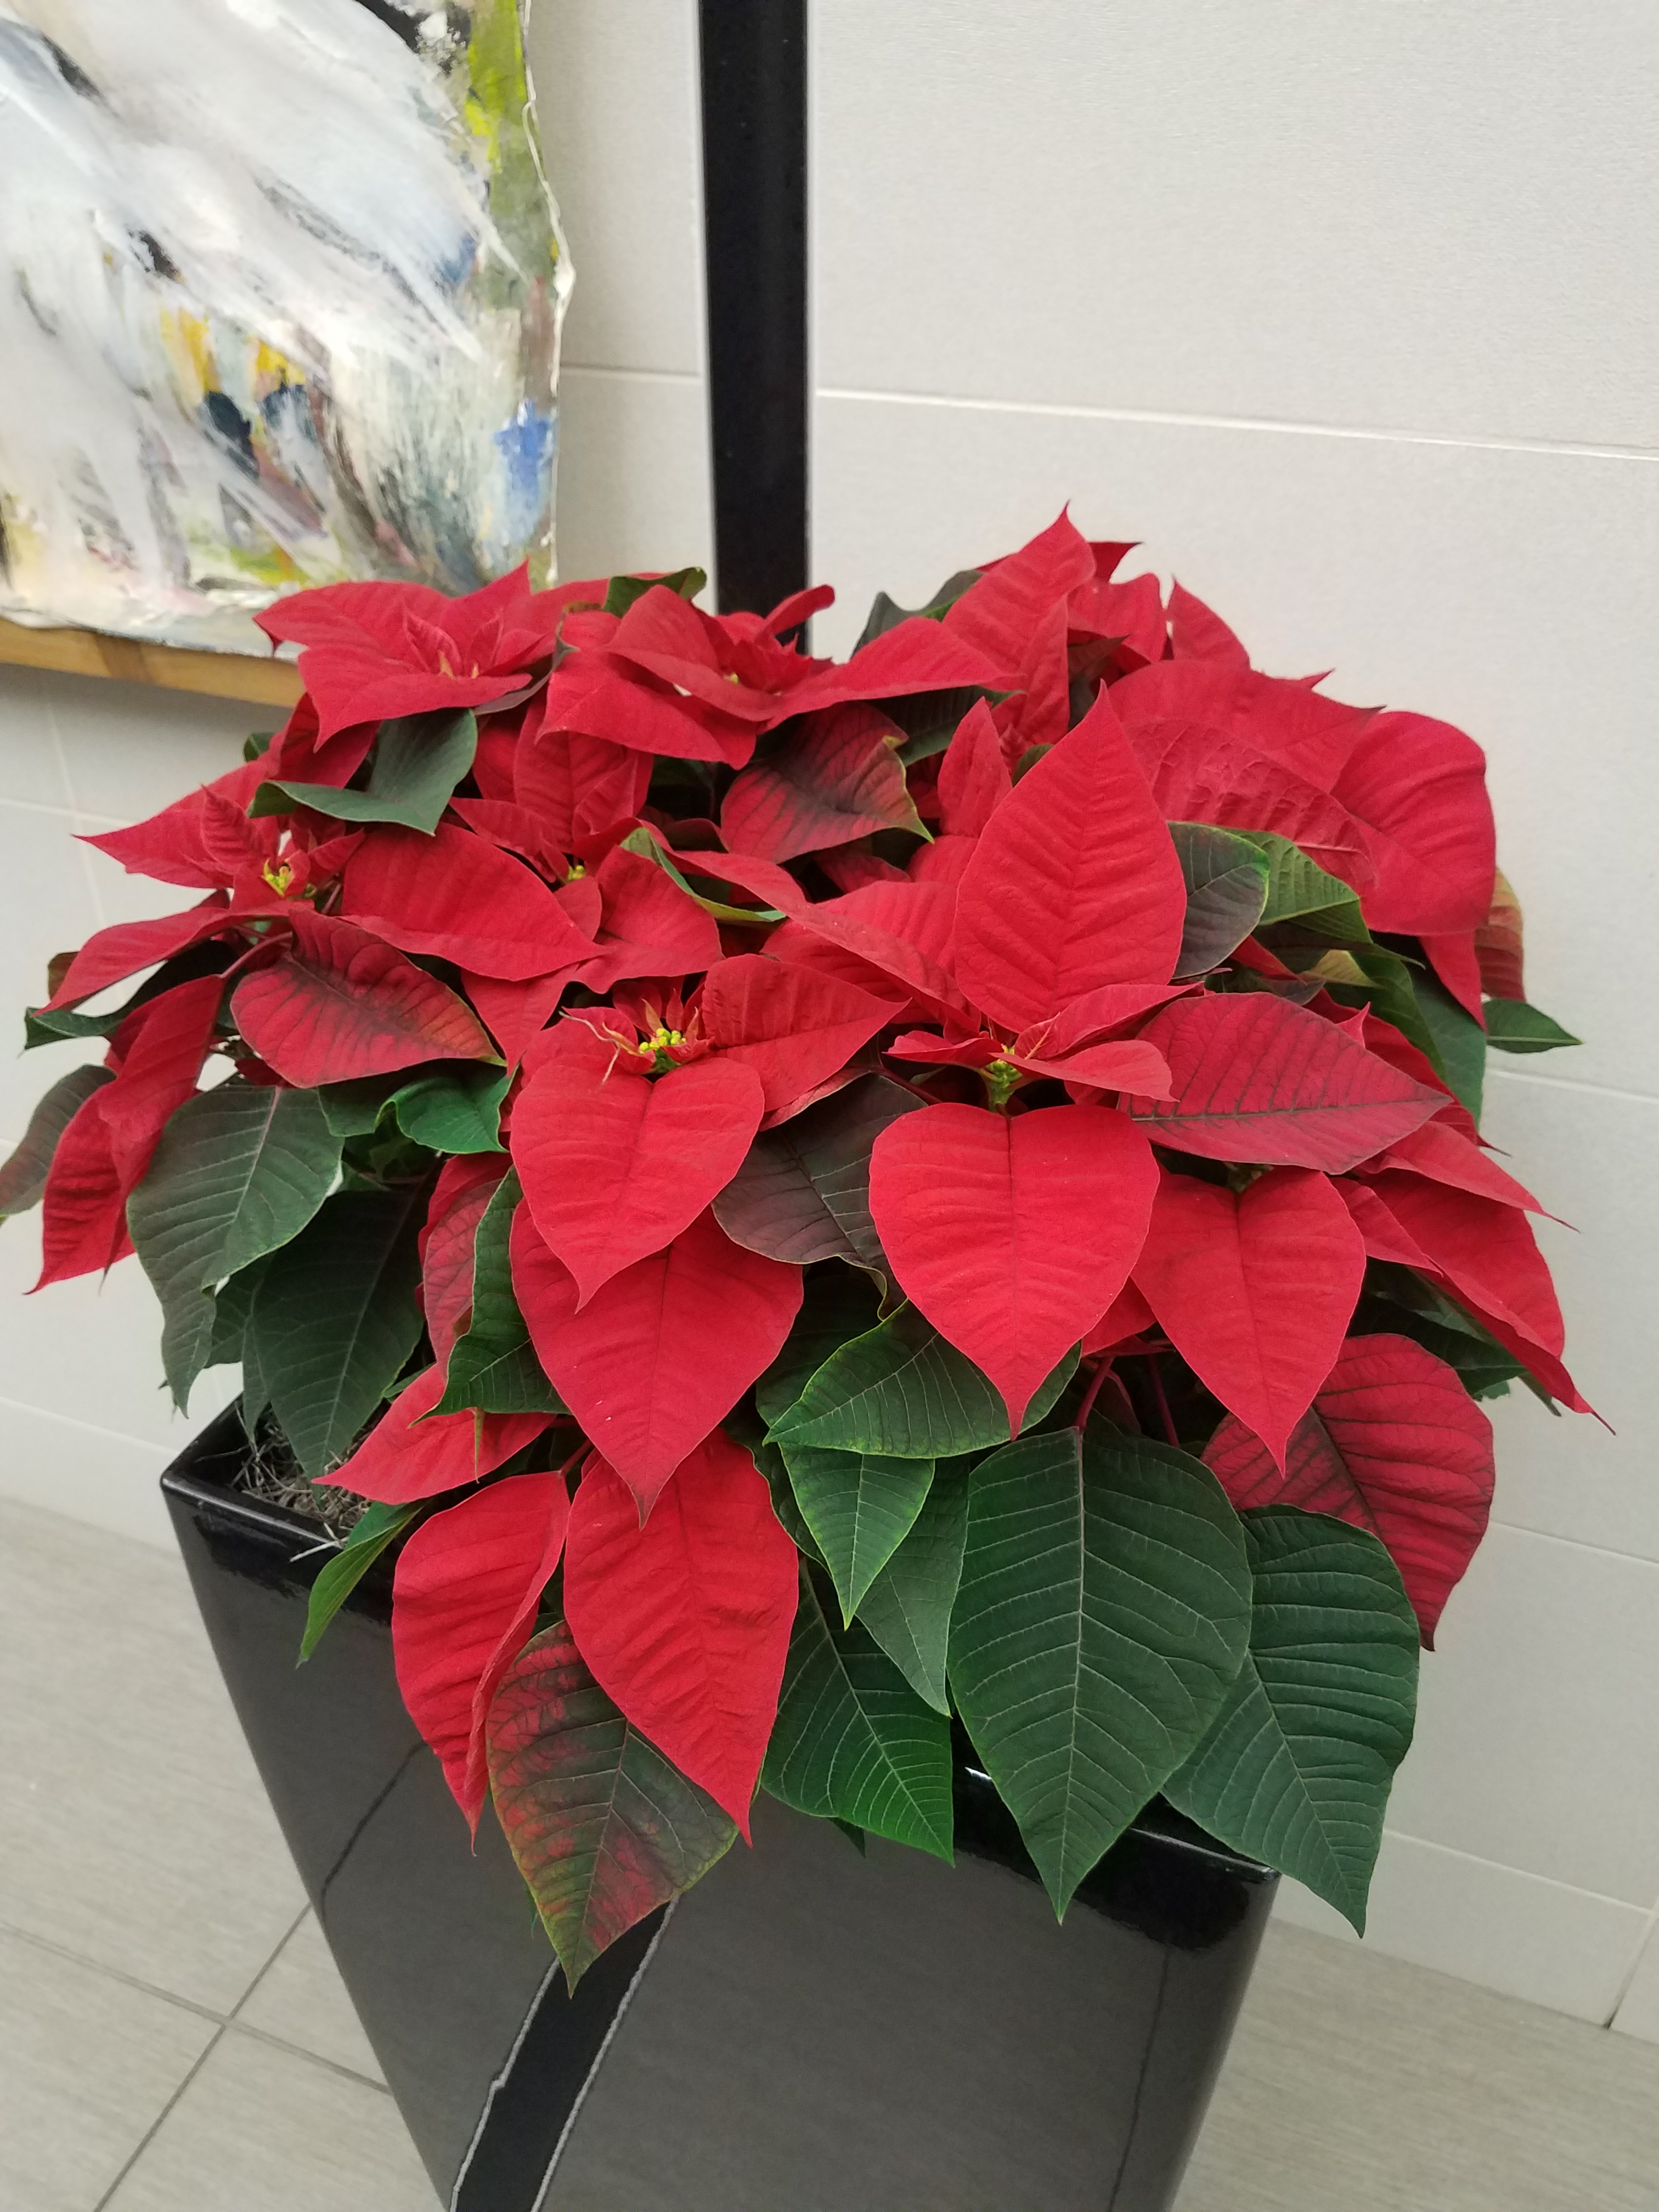 Growing and caring for poinsettia   UMN Extension